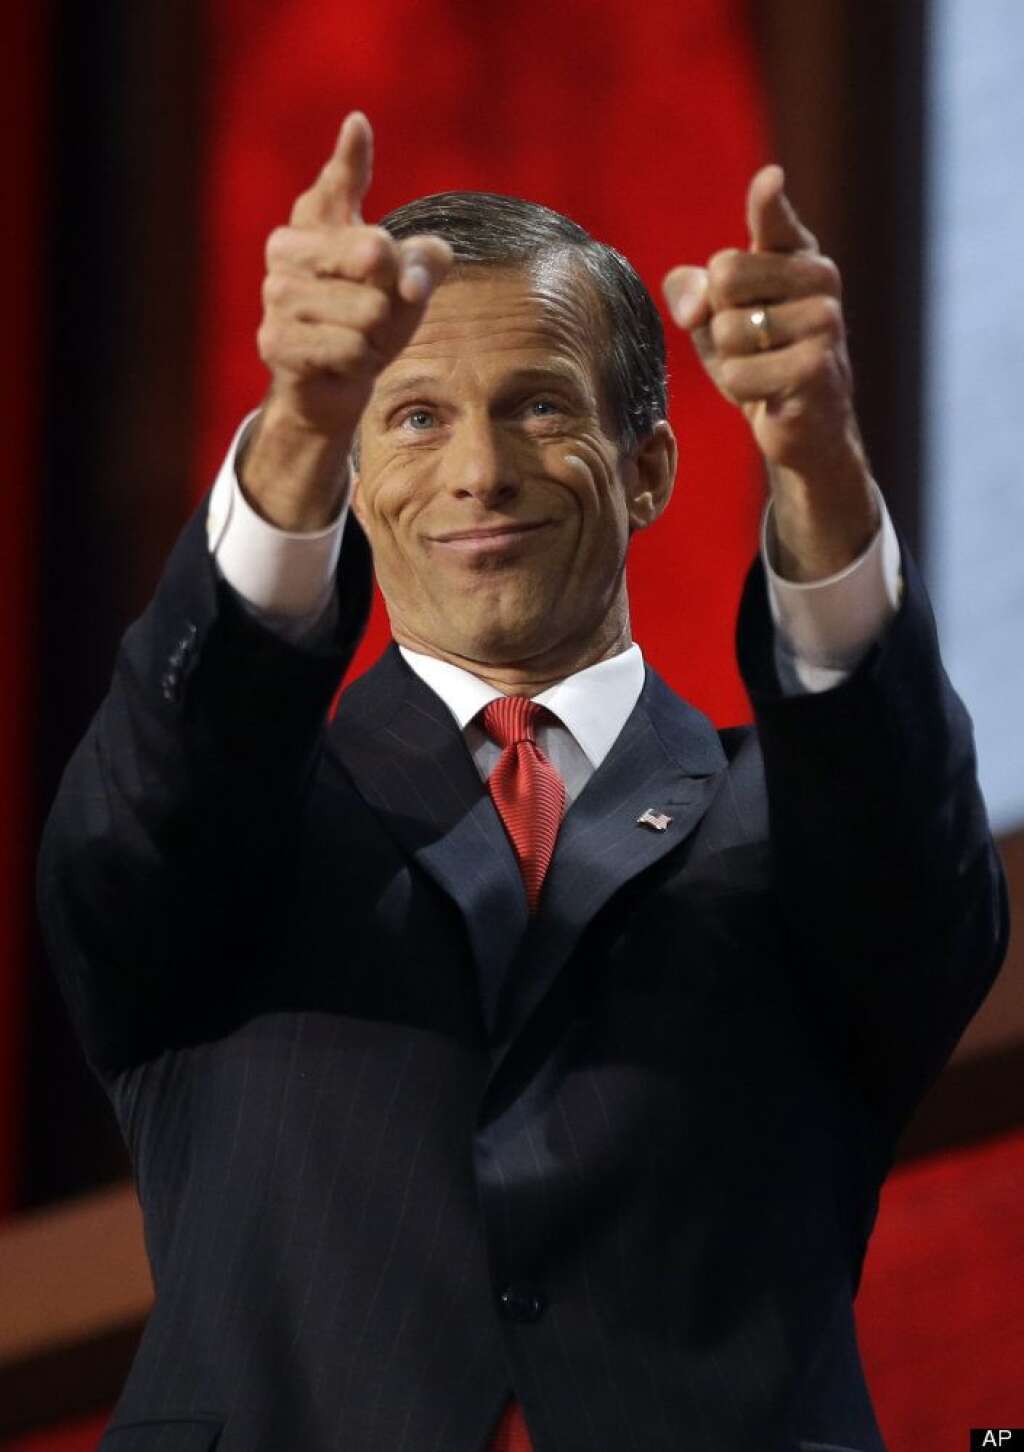 John Thune - South Dakota Senator John Thune gestures to the delegates during the Republican National Convention in Tampa, Fla., on Wednesday, Aug. 29, 2012. (AP Photo/Charles Dharapak)